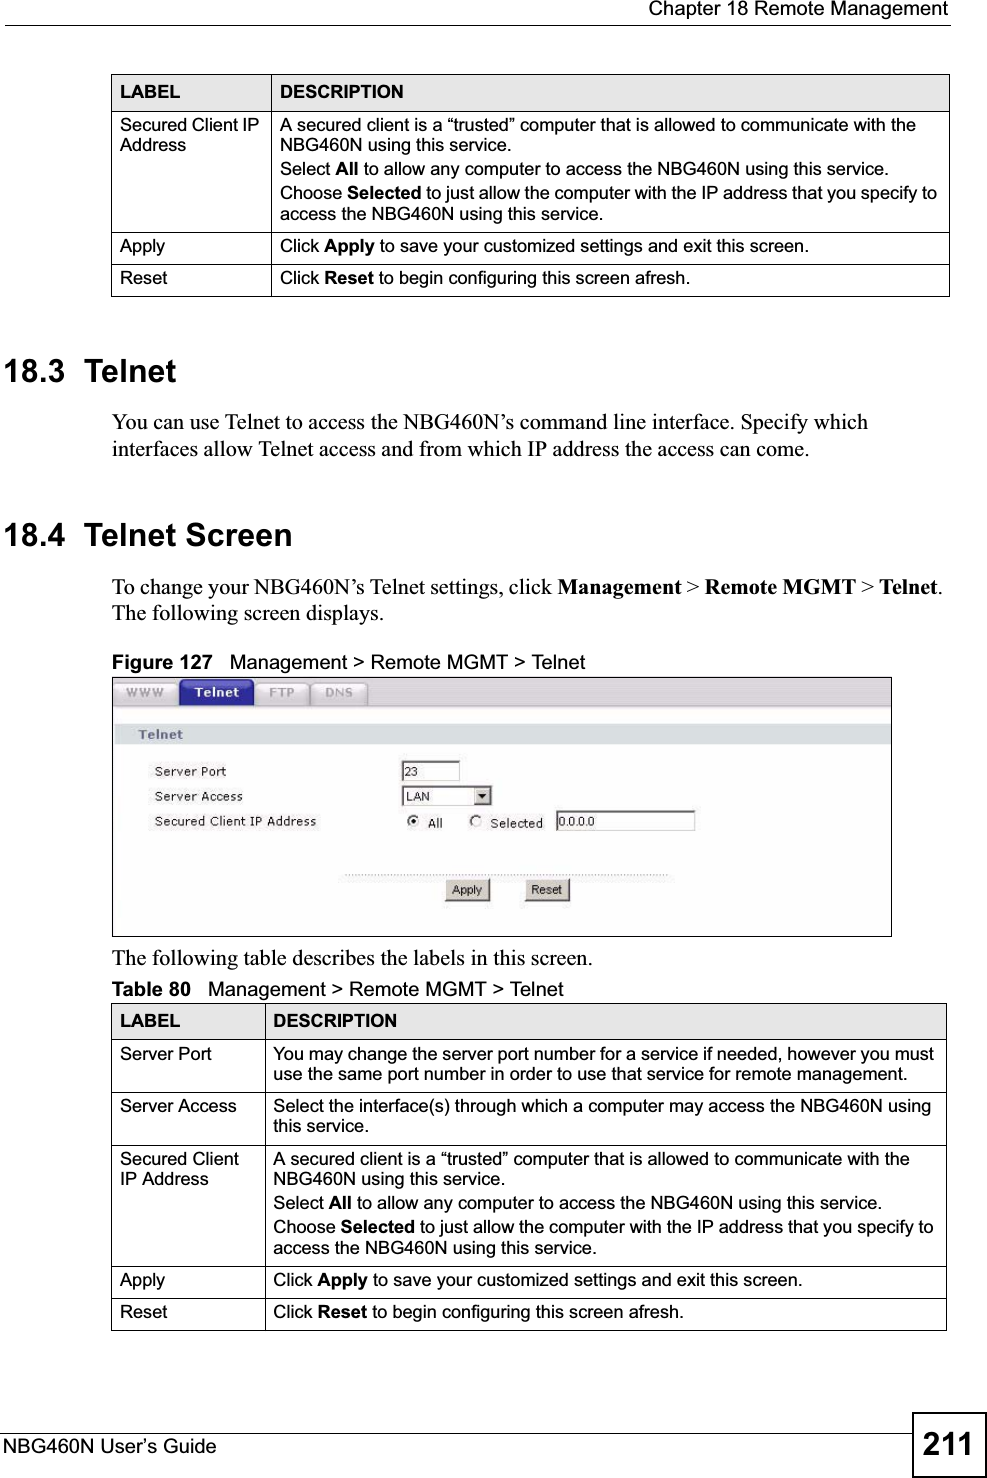  Chapter 18 Remote ManagementNBG460N User’s Guide 21118.3  TelnetYou can use Telnet to access the NBG460N’s command line interface. Specify which interfaces allow Telnet access and from which IP address the access can come.18.4  Telnet ScreenTo change your NBG460N’s Telnet settings, click Management &gt; Remote MGMT &gt; Telnet.The following screen displays. Figure 127   Management &gt; Remote MGMT &gt; Telnet The following table describes the labels in this screen.Secured Client IP AddressA secured client is a “trusted” computer that is allowed to communicate with the NBG460N using this service. Select All to allow any computer to access the NBG460N using this service.Choose Selected to just allow the computer with the IP address that you specify to access the NBG460N using this service.Apply Click Apply to save your customized settings and exit this screen. Reset Click Reset to begin configuring this screen afresh.LABEL DESCRIPTIONTable 80   Management &gt; Remote MGMT &gt; TelnetLABEL DESCRIPTIONServer Port You may change the server port number for a service if needed, however you must use the same port number in order to use that service for remote management.Server Access Select the interface(s) through which a computer may access the NBG460N using this service.Secured Client IP AddressA secured client is a “trusted” computer that is allowed to communicate with the NBG460N using this service. Select All to allow any computer to access the NBG460N using this service.Choose Selected to just allow the computer with the IP address that you specify to access the NBG460N using this service.Apply Click Apply to save your customized settings and exit this screen. Reset Click Reset to begin configuring this screen afresh.